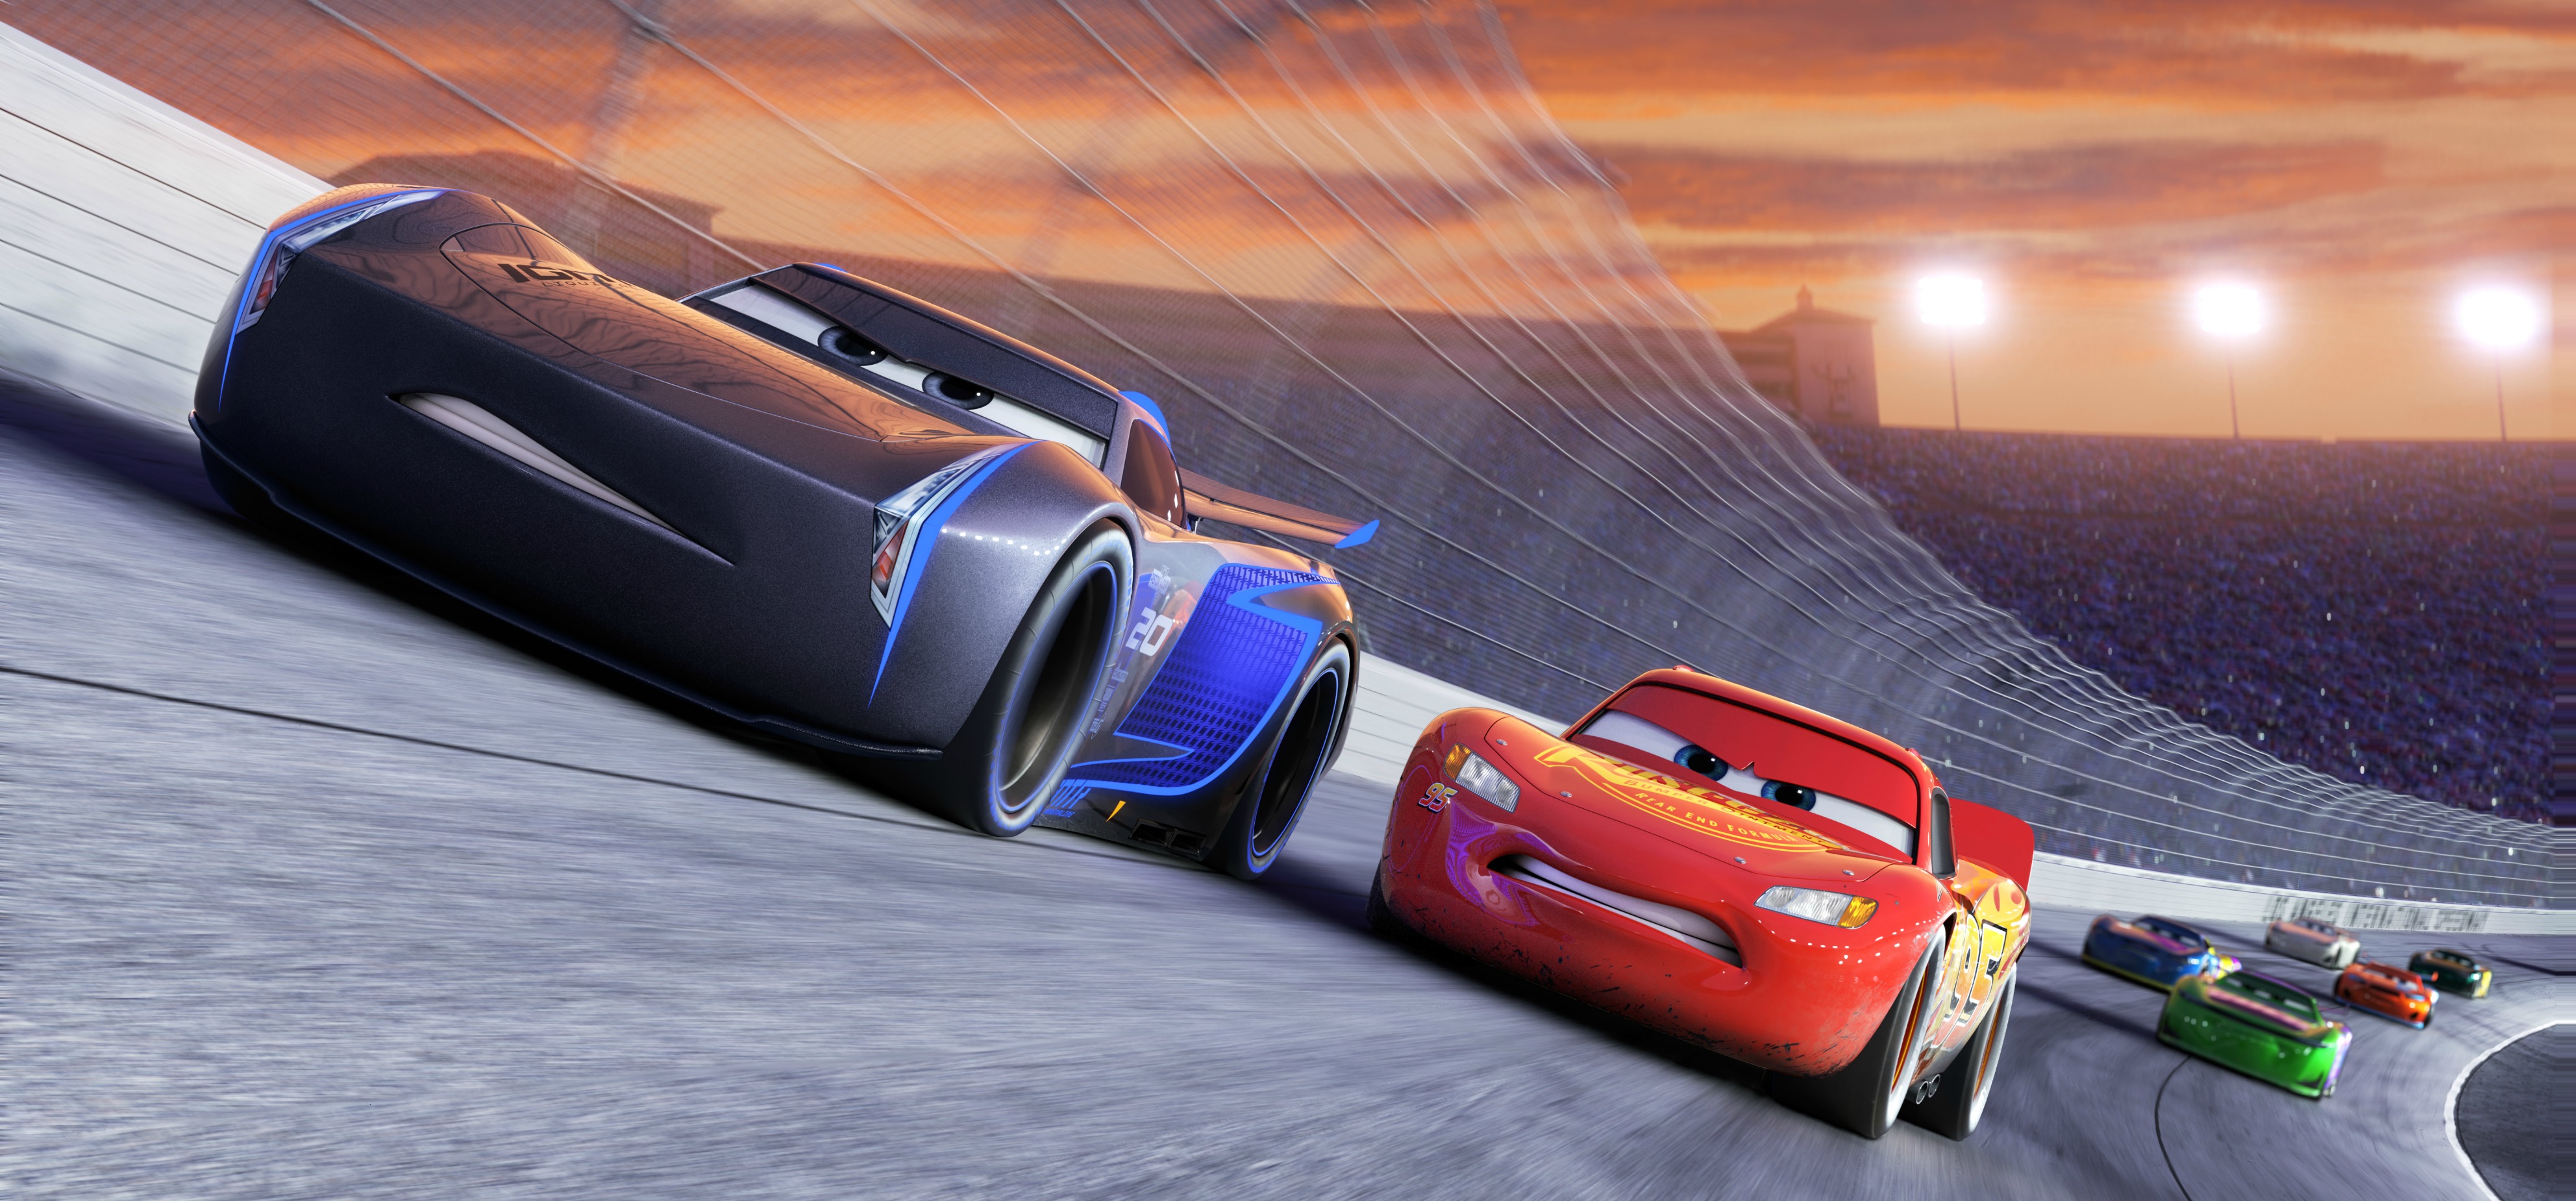 Interview with Cars 3 Director and Producer